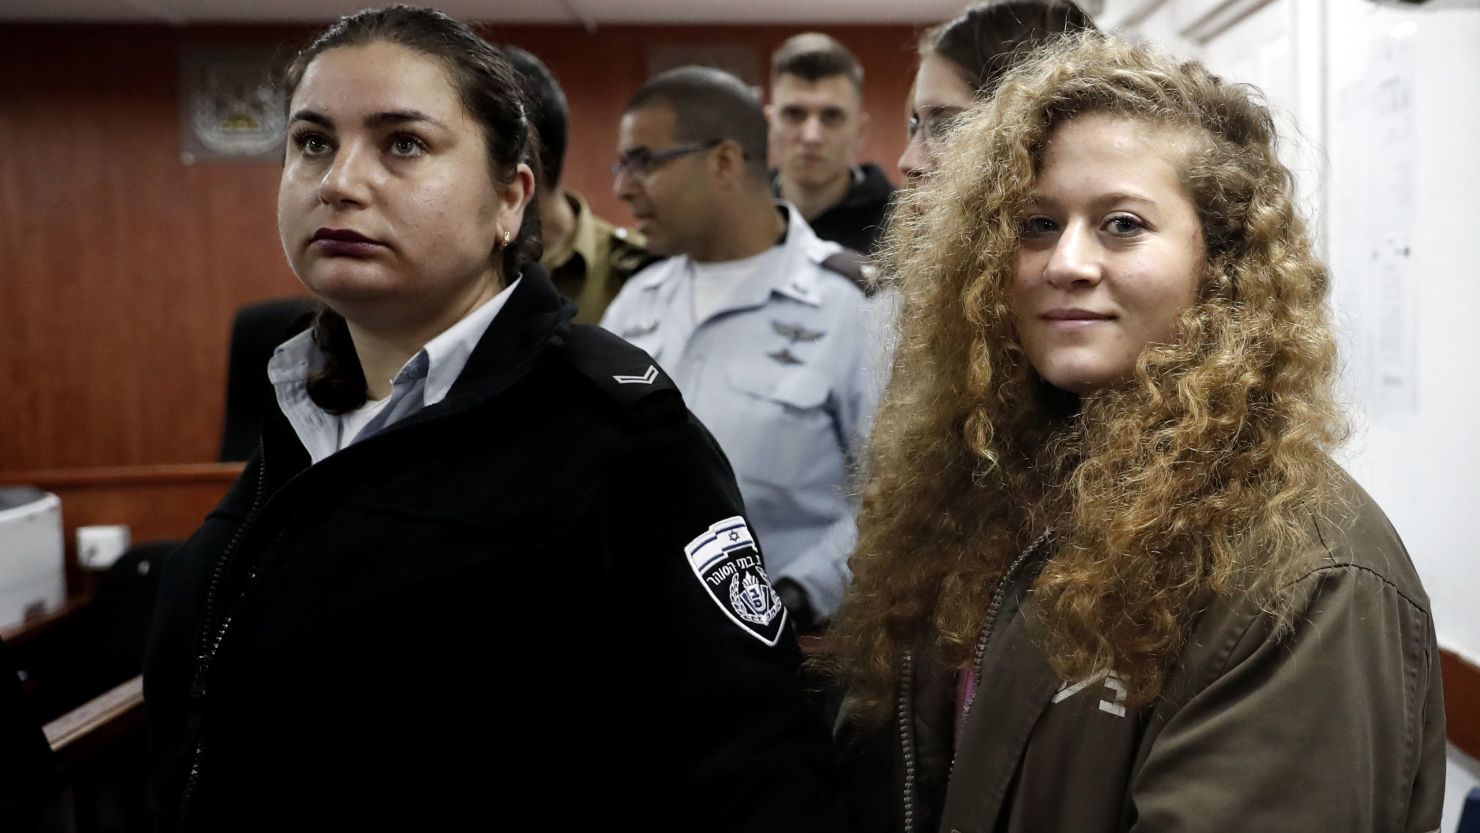  Ahed Tamimi, right, appears in court in February.